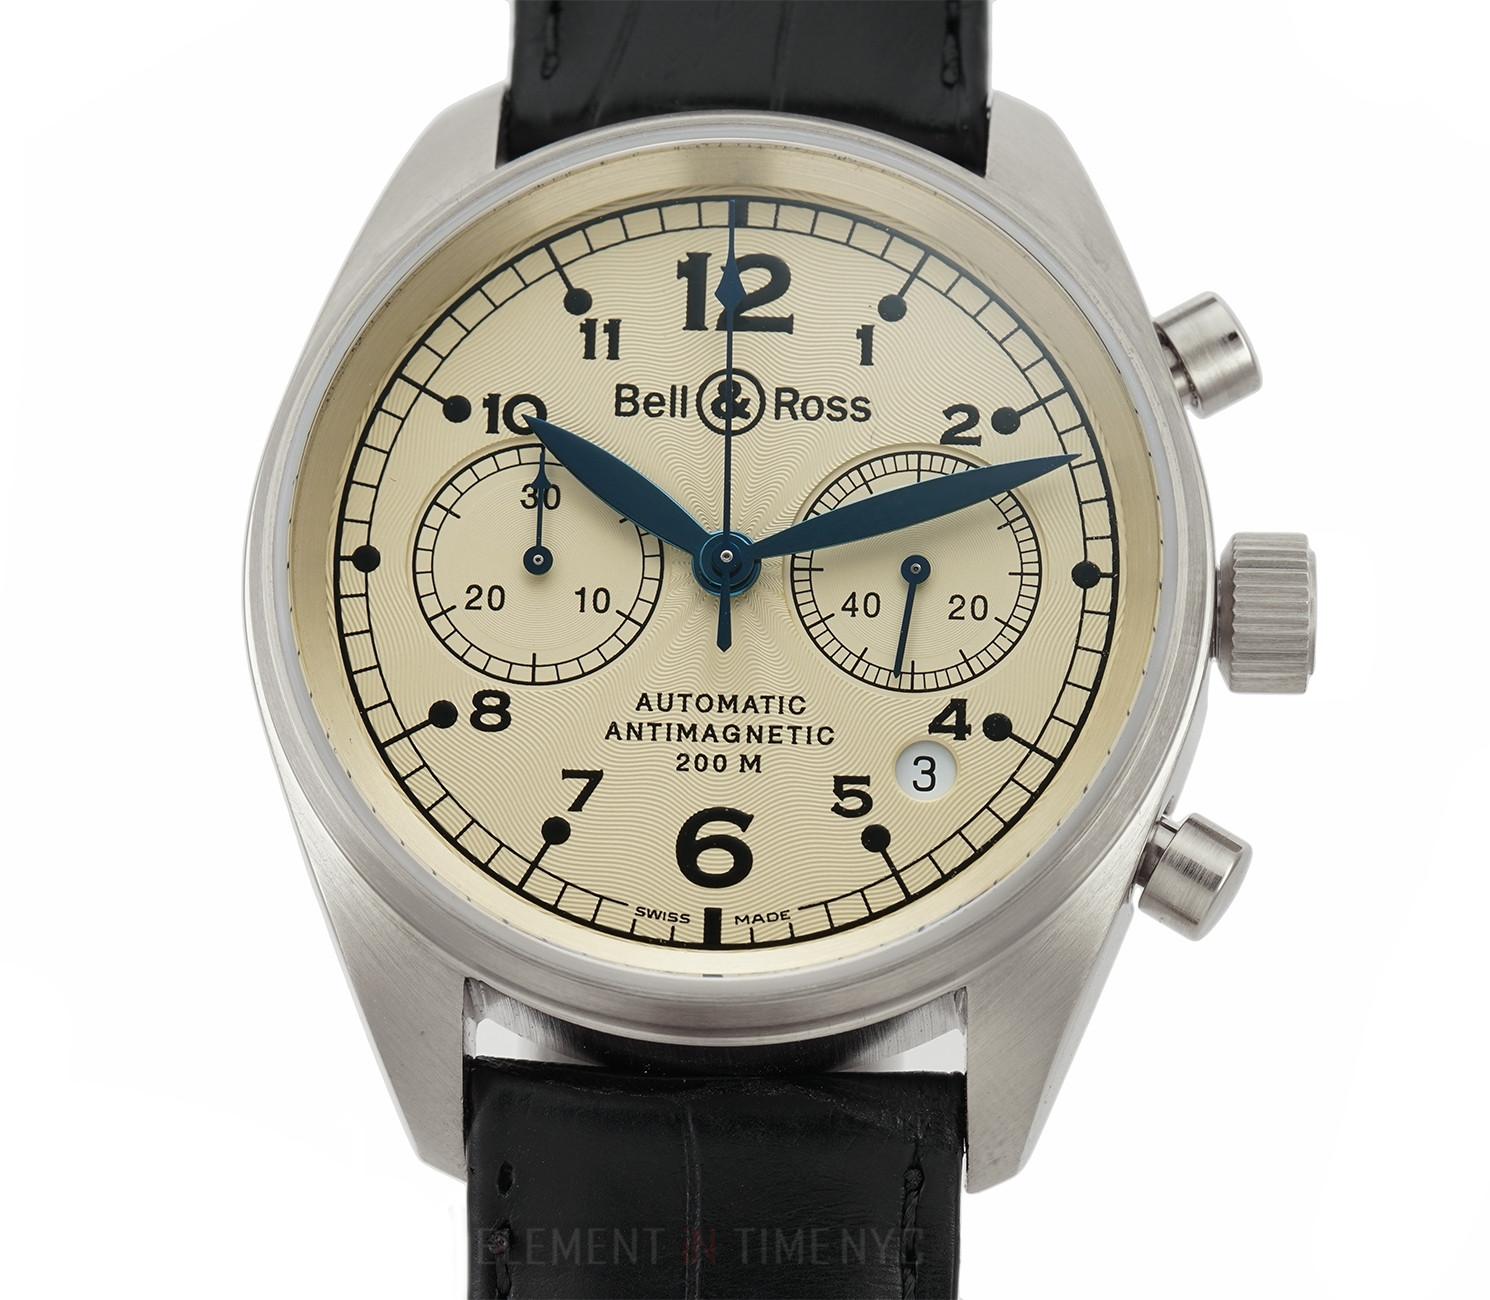 Bell & Ross Bell & Ross Reference #: BR 126. Mens Automatic Self Wind Watch White Gold Champagne 39 MM. Verified and Certified by WatchFacts. 1 year warranty offered by WatchFacts.